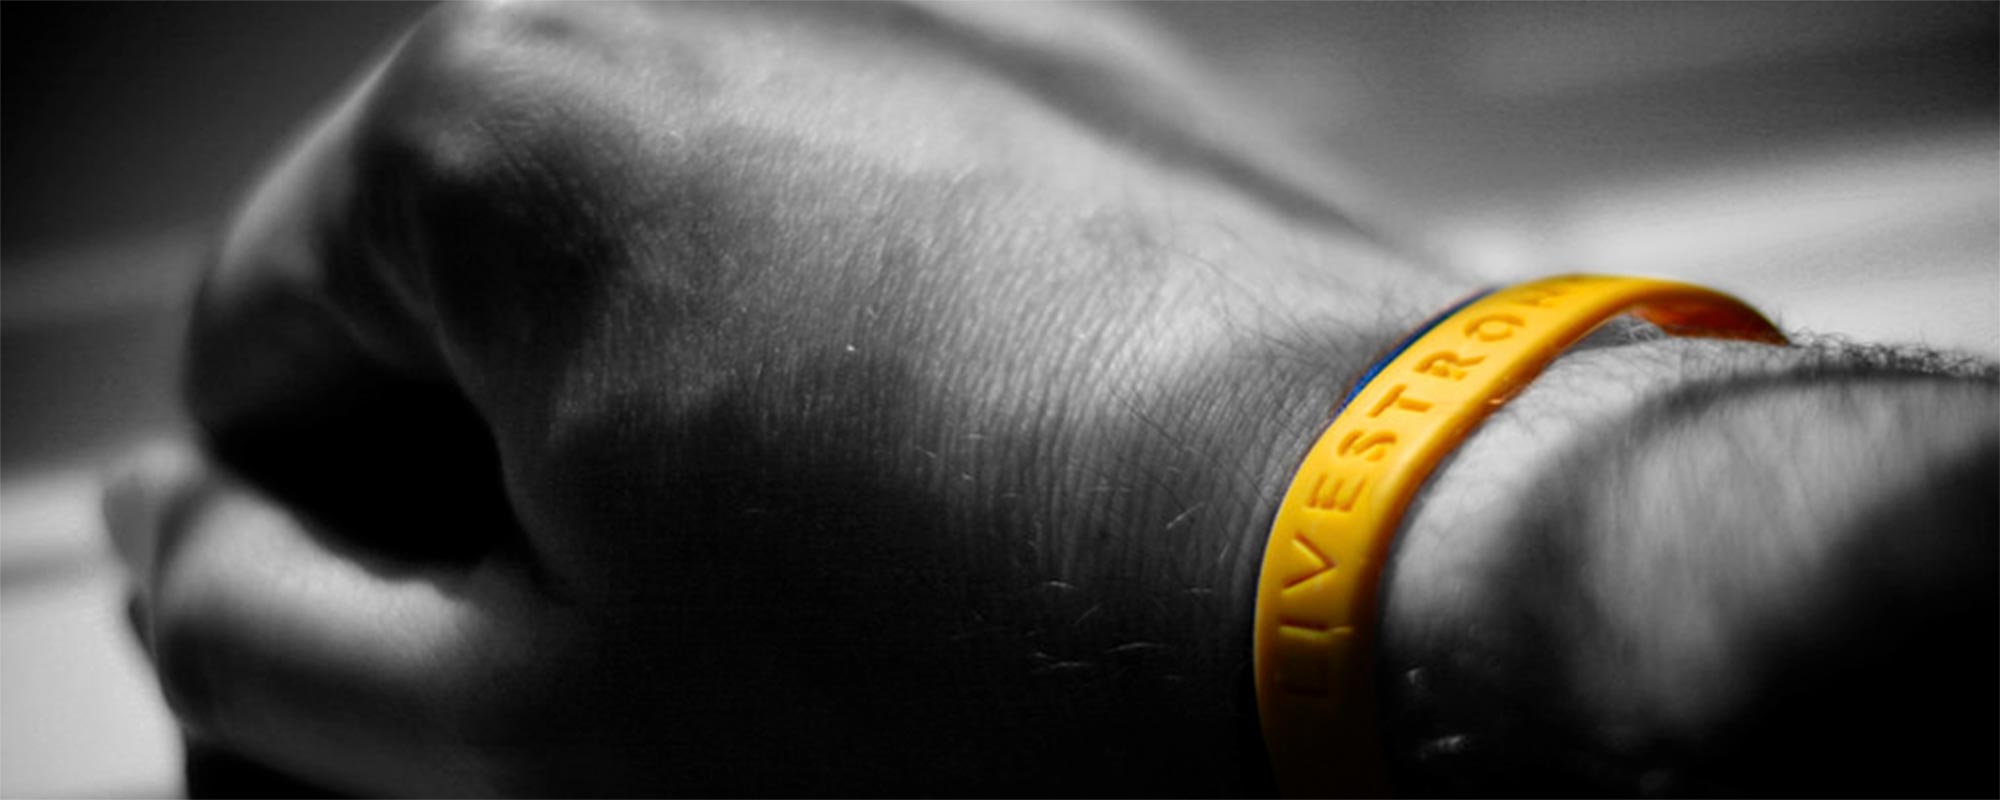 photo of person wearing livestrong bracelet